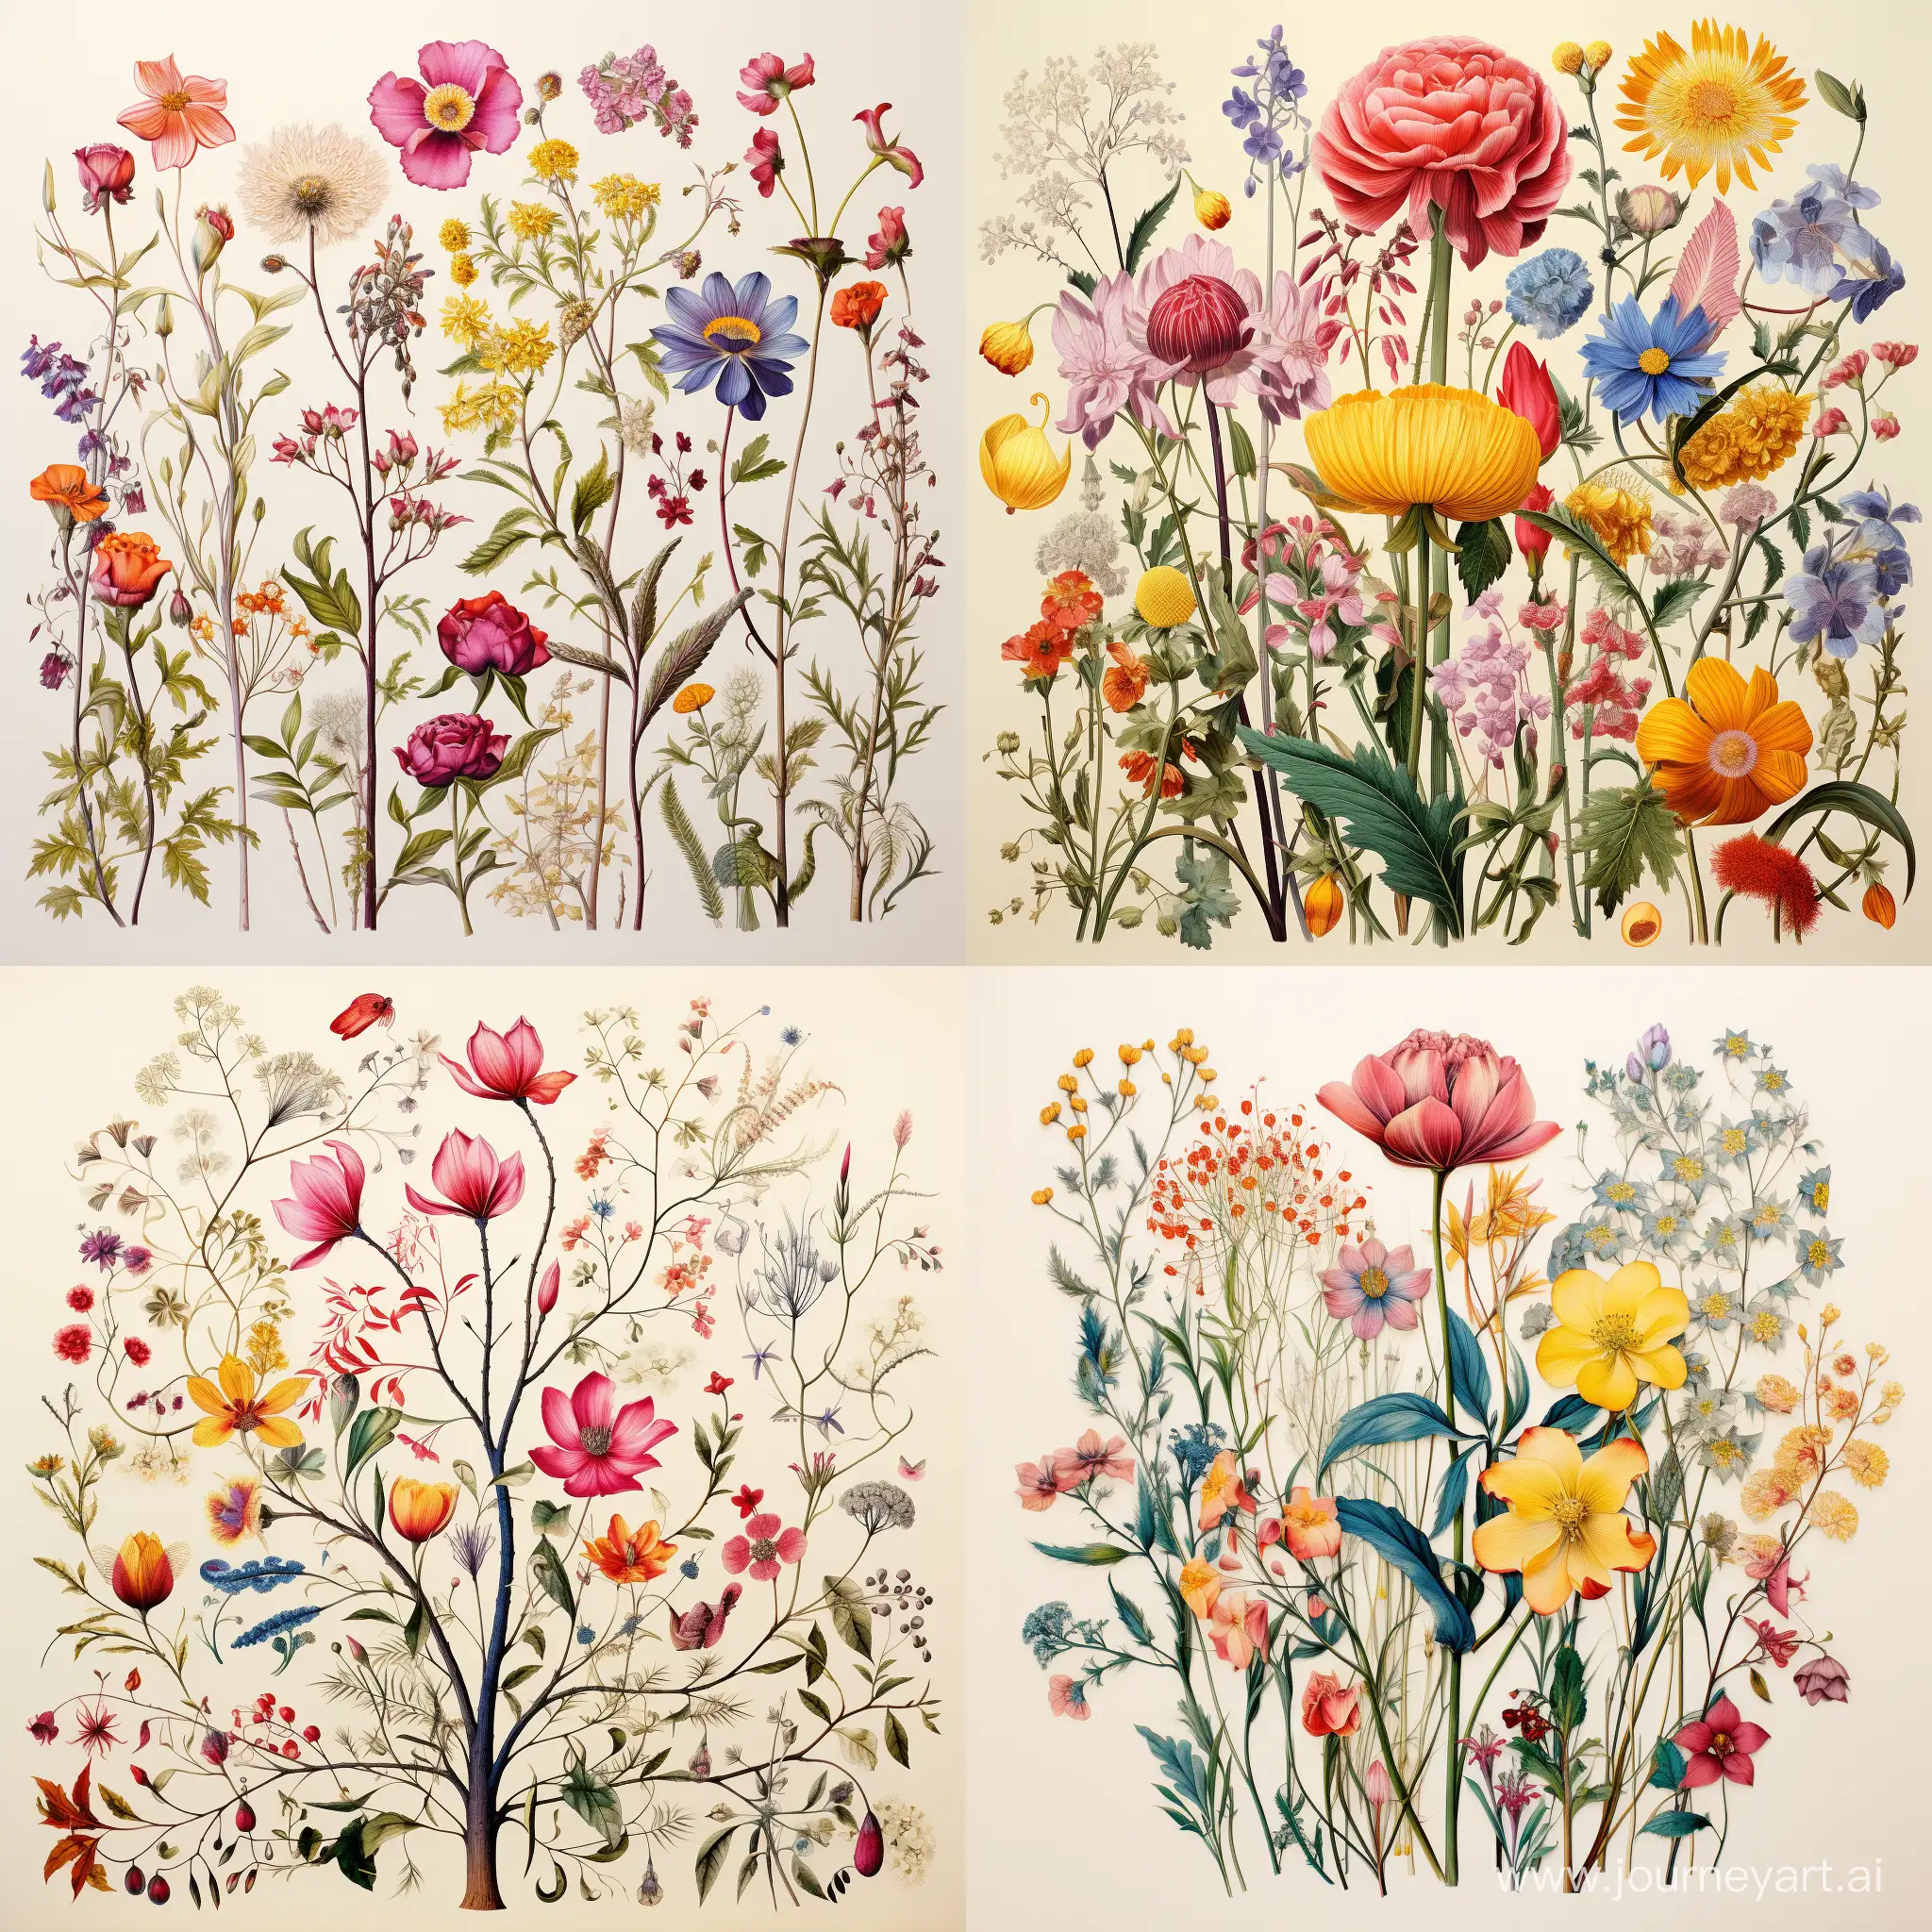 Exquisite-Botanical-Illustrations-of-Flowers-and-Trees